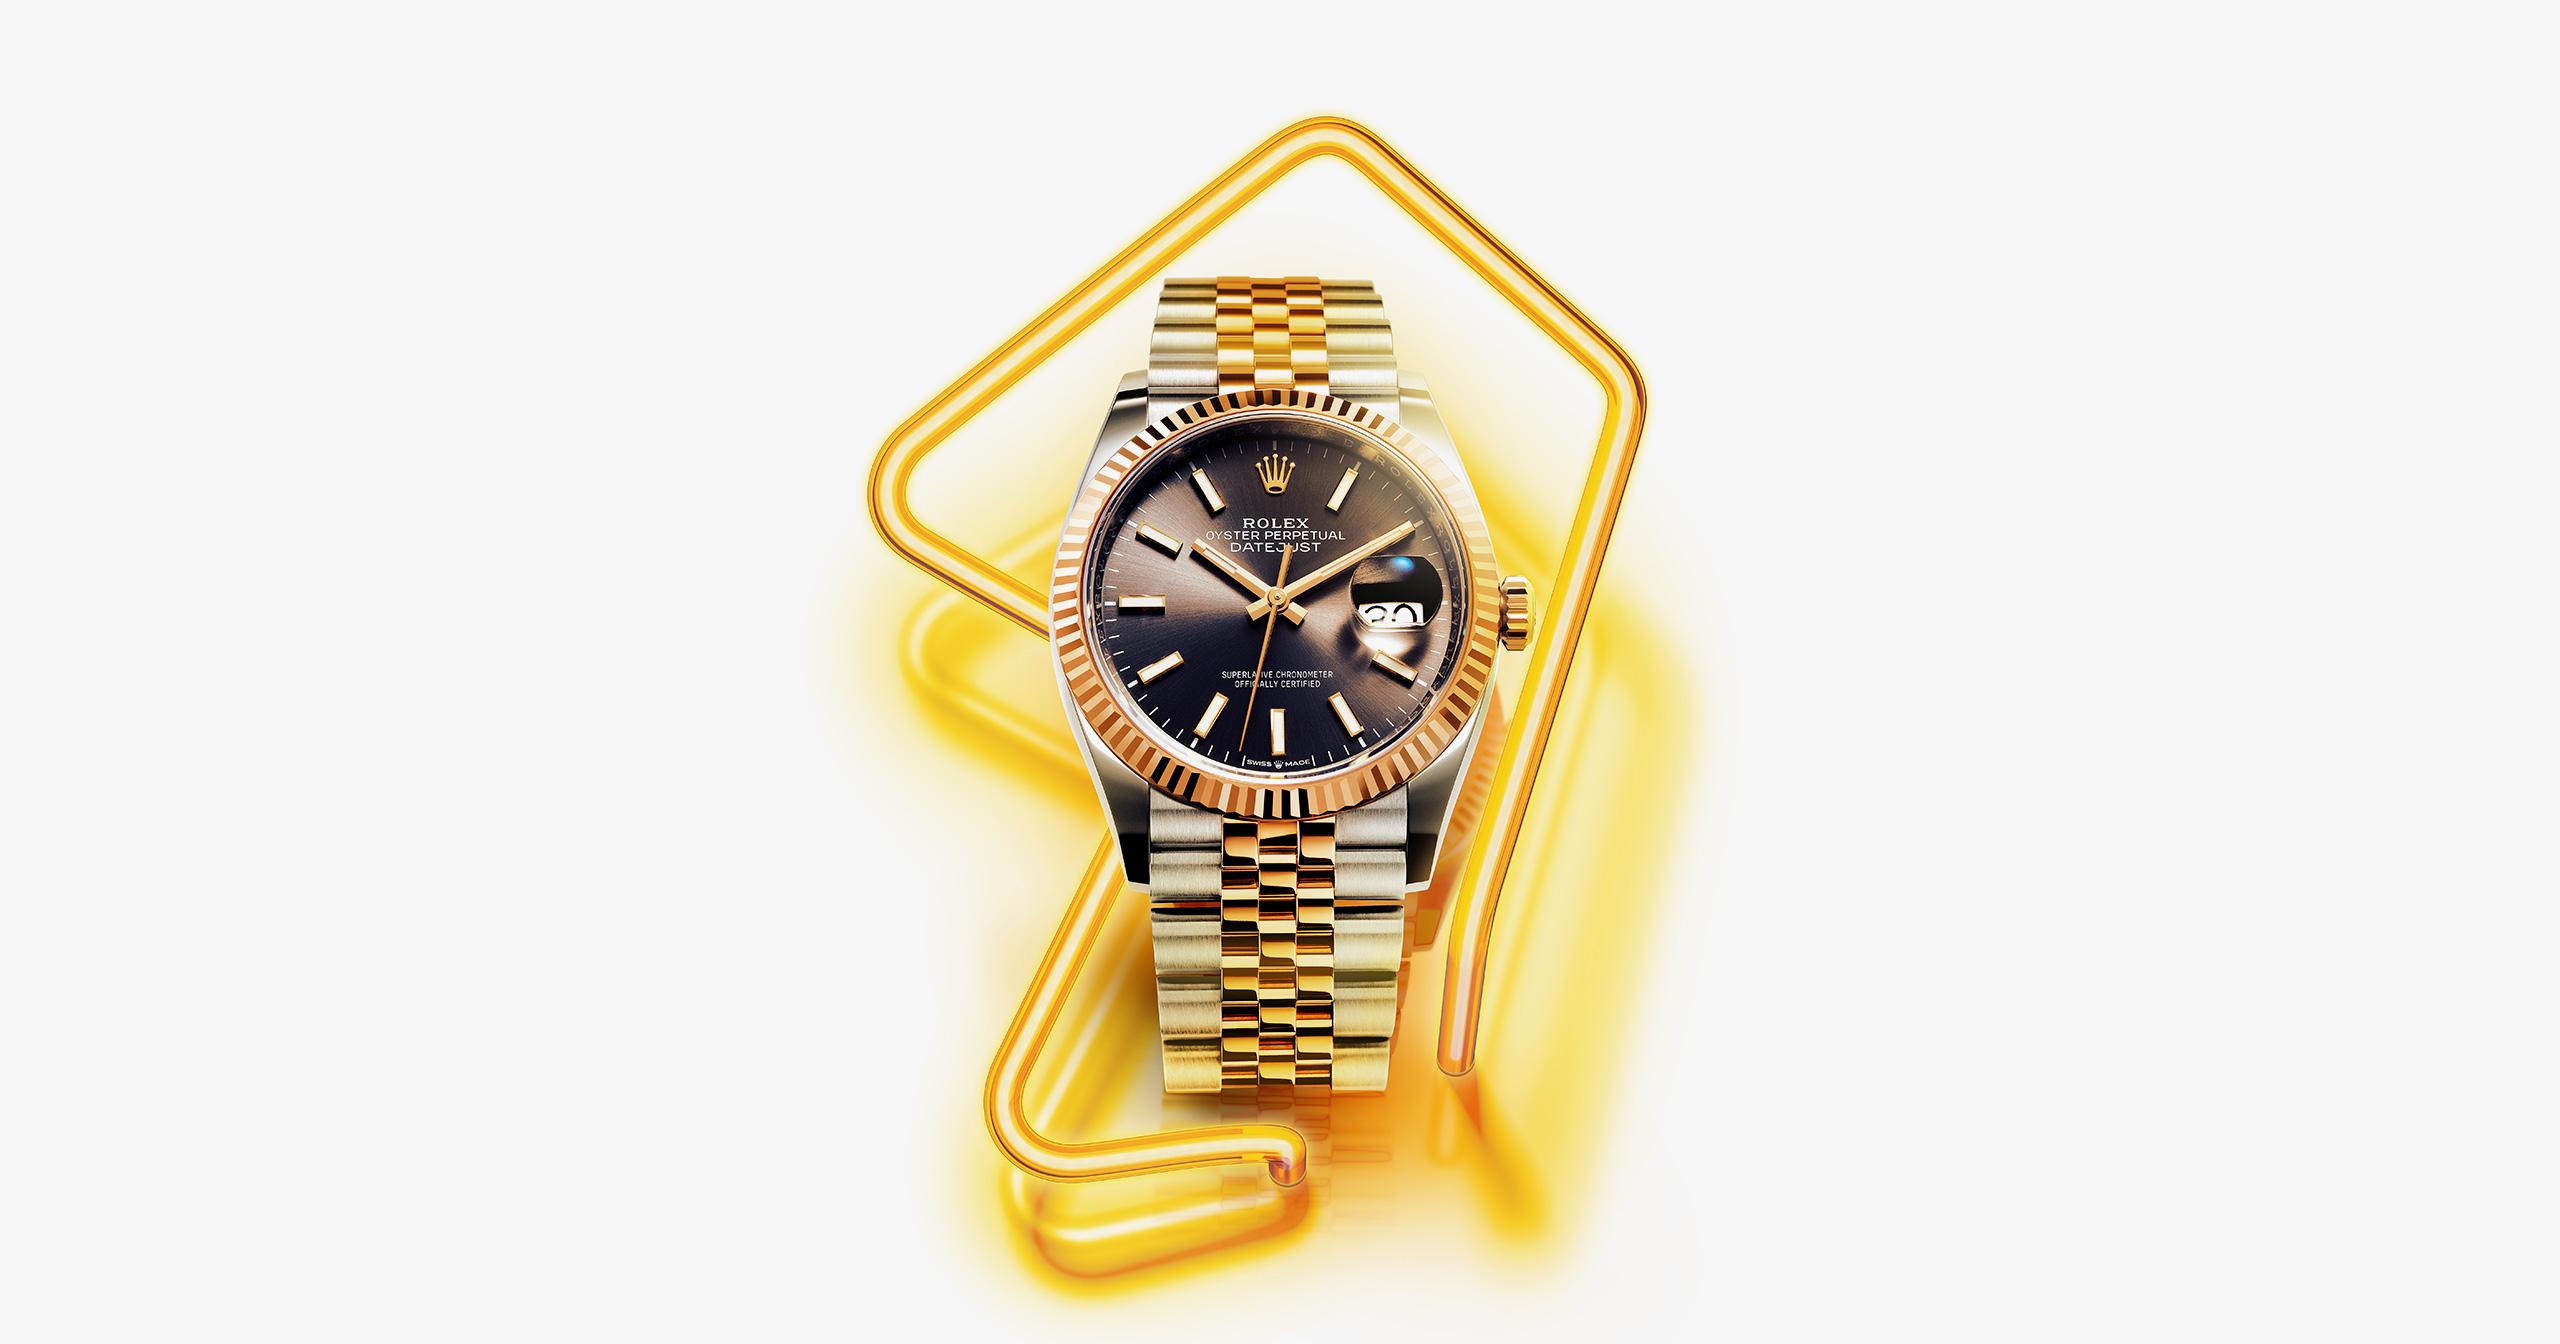 Creative retouching and post production Rolex Watch image enhanced with 3D/CGI neon light effects for Men’s Health magazine